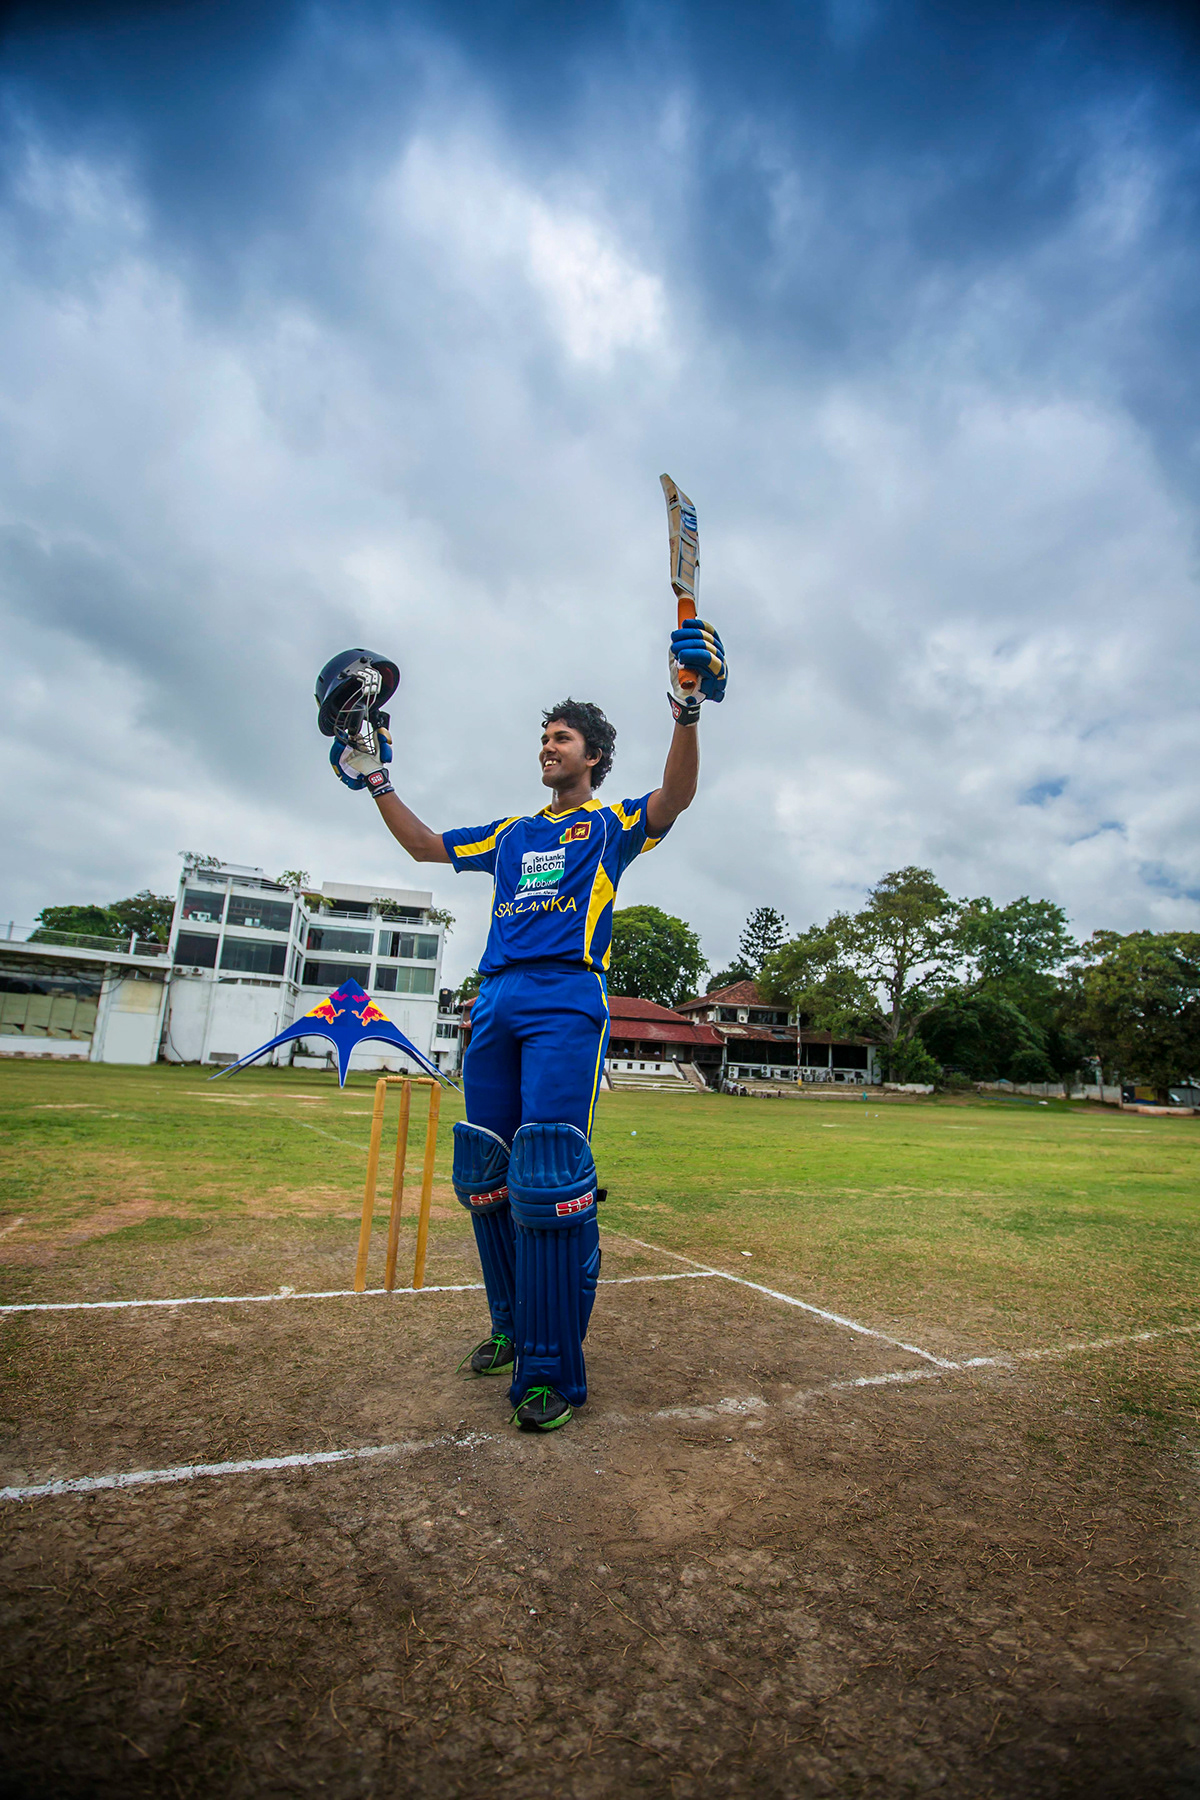 dinesh Chandimal  redbull Cricket can in hand colombo cricket cinnamon lakeside dimitri crusz sports photography action sports